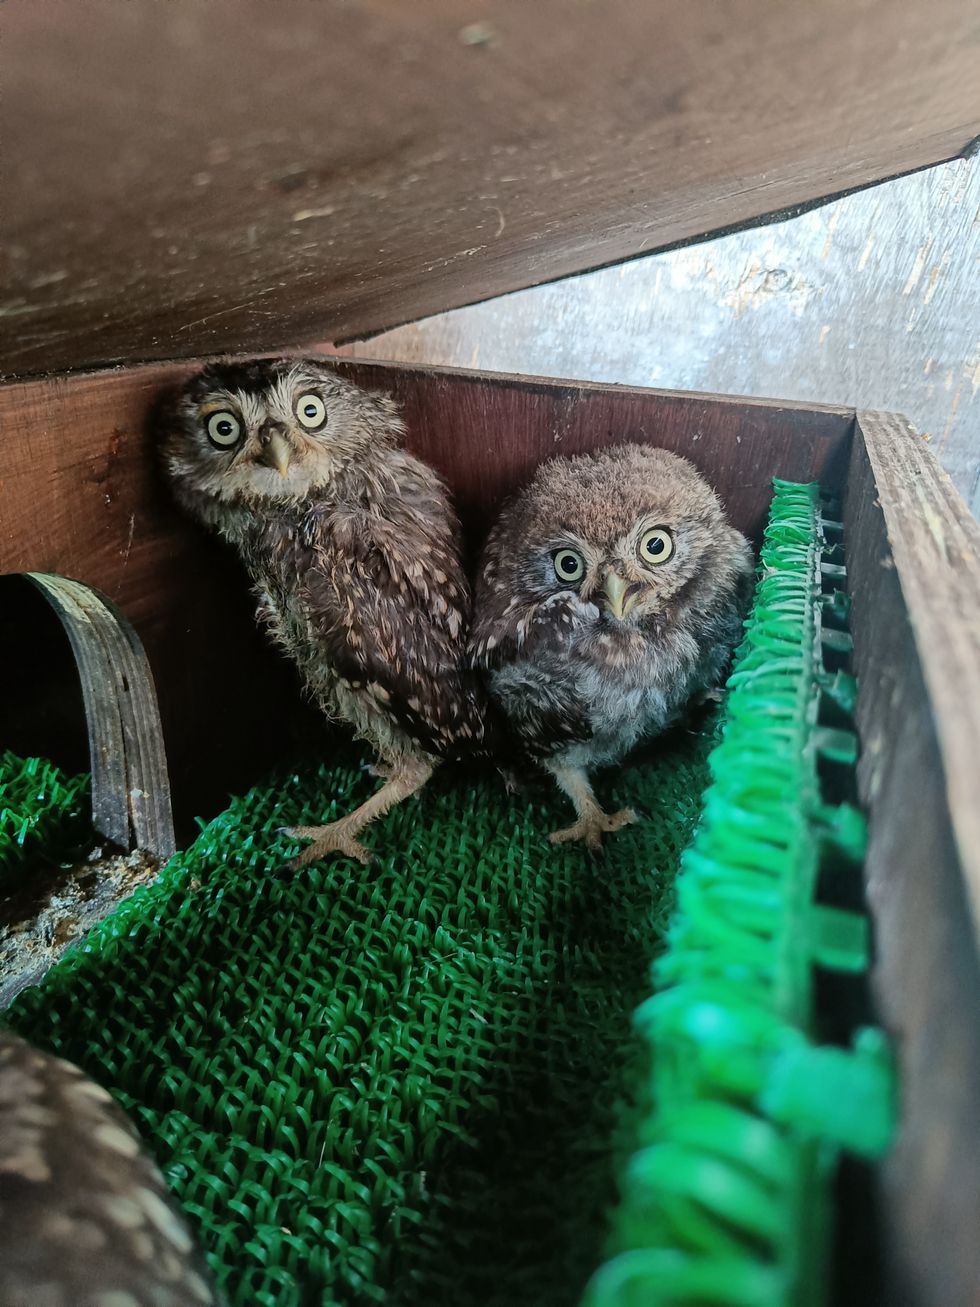 Young owls rescued from Glastonbury’s Pyramid Stage after Guns N’ Roses set